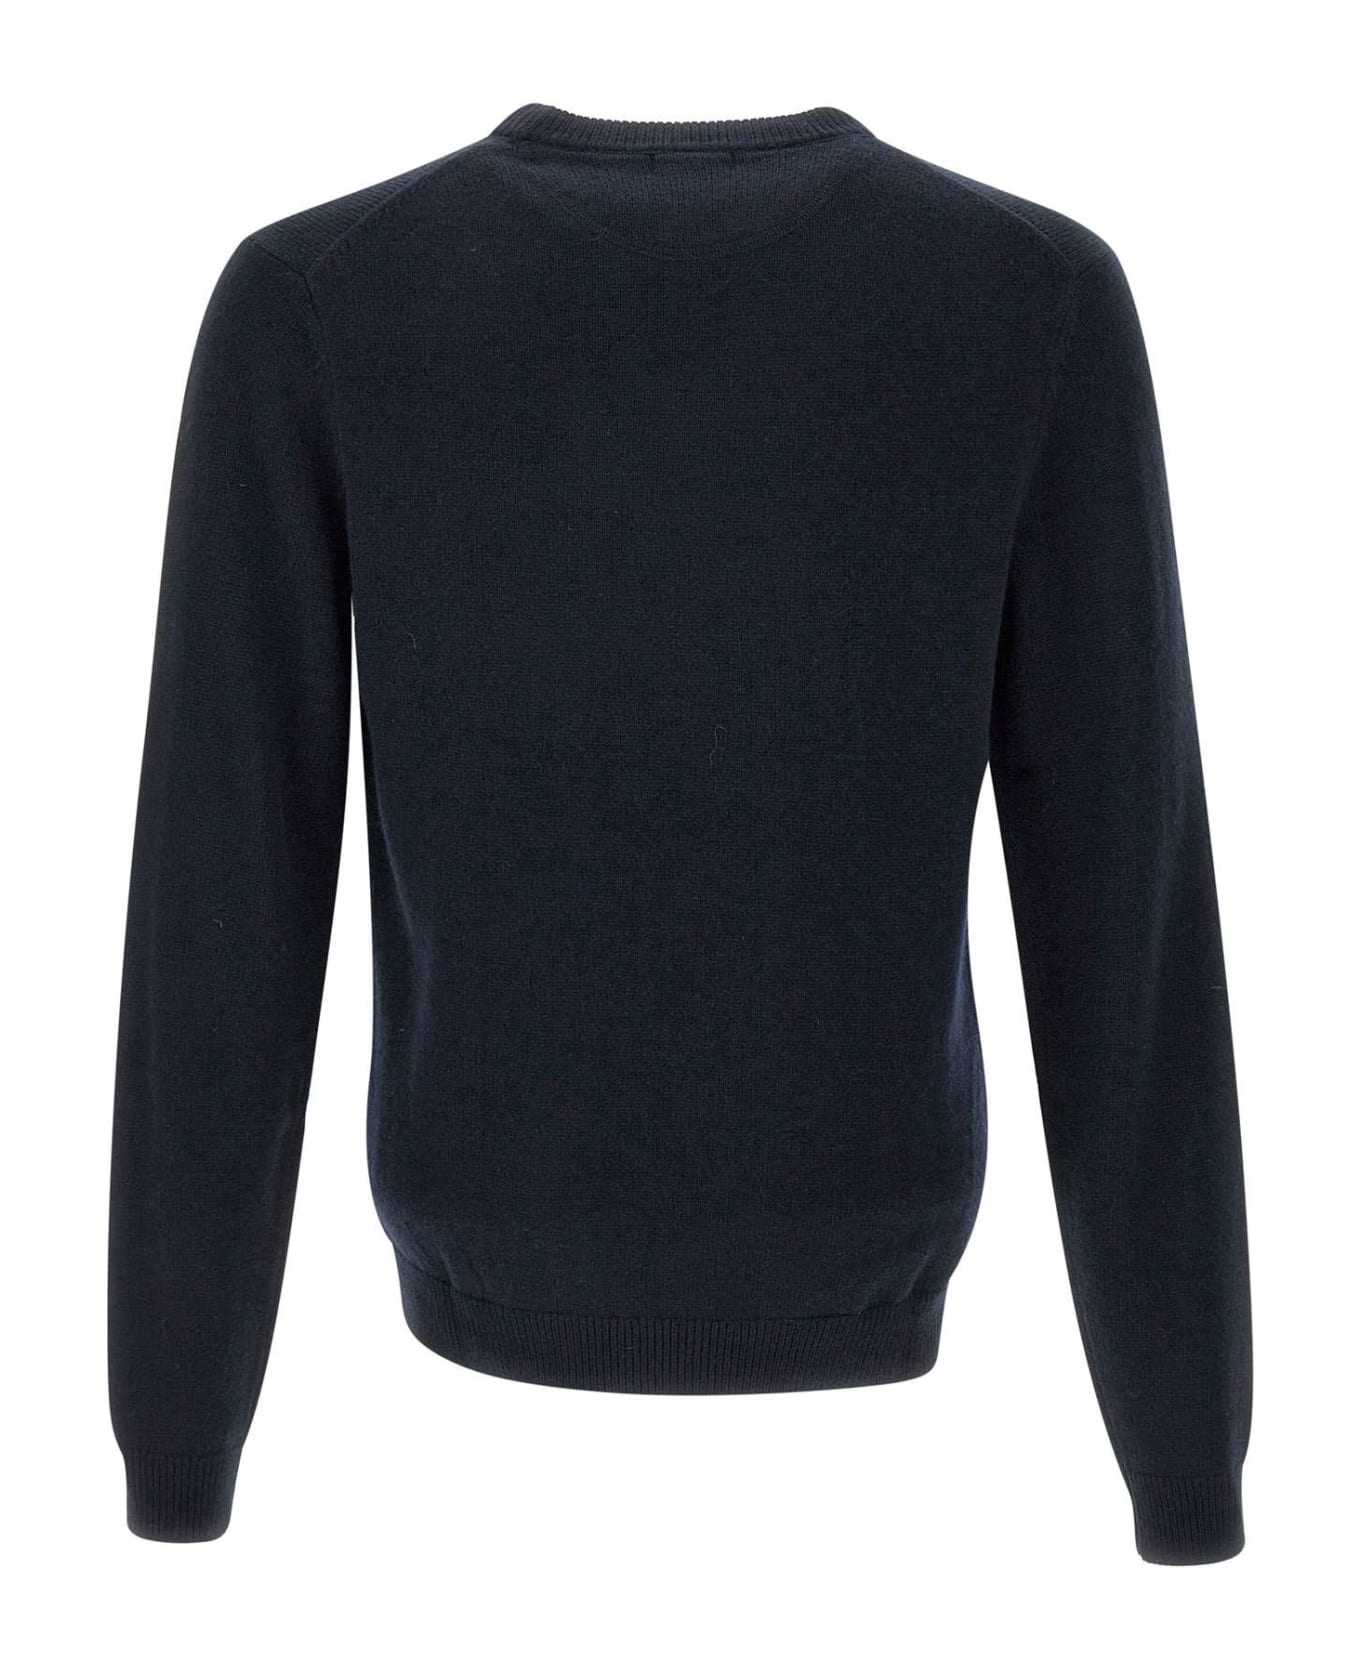 Sun 68 'round Solid' Wool And Viscose Blend Pullover Sweater - NAVY BLUE ニットウェア